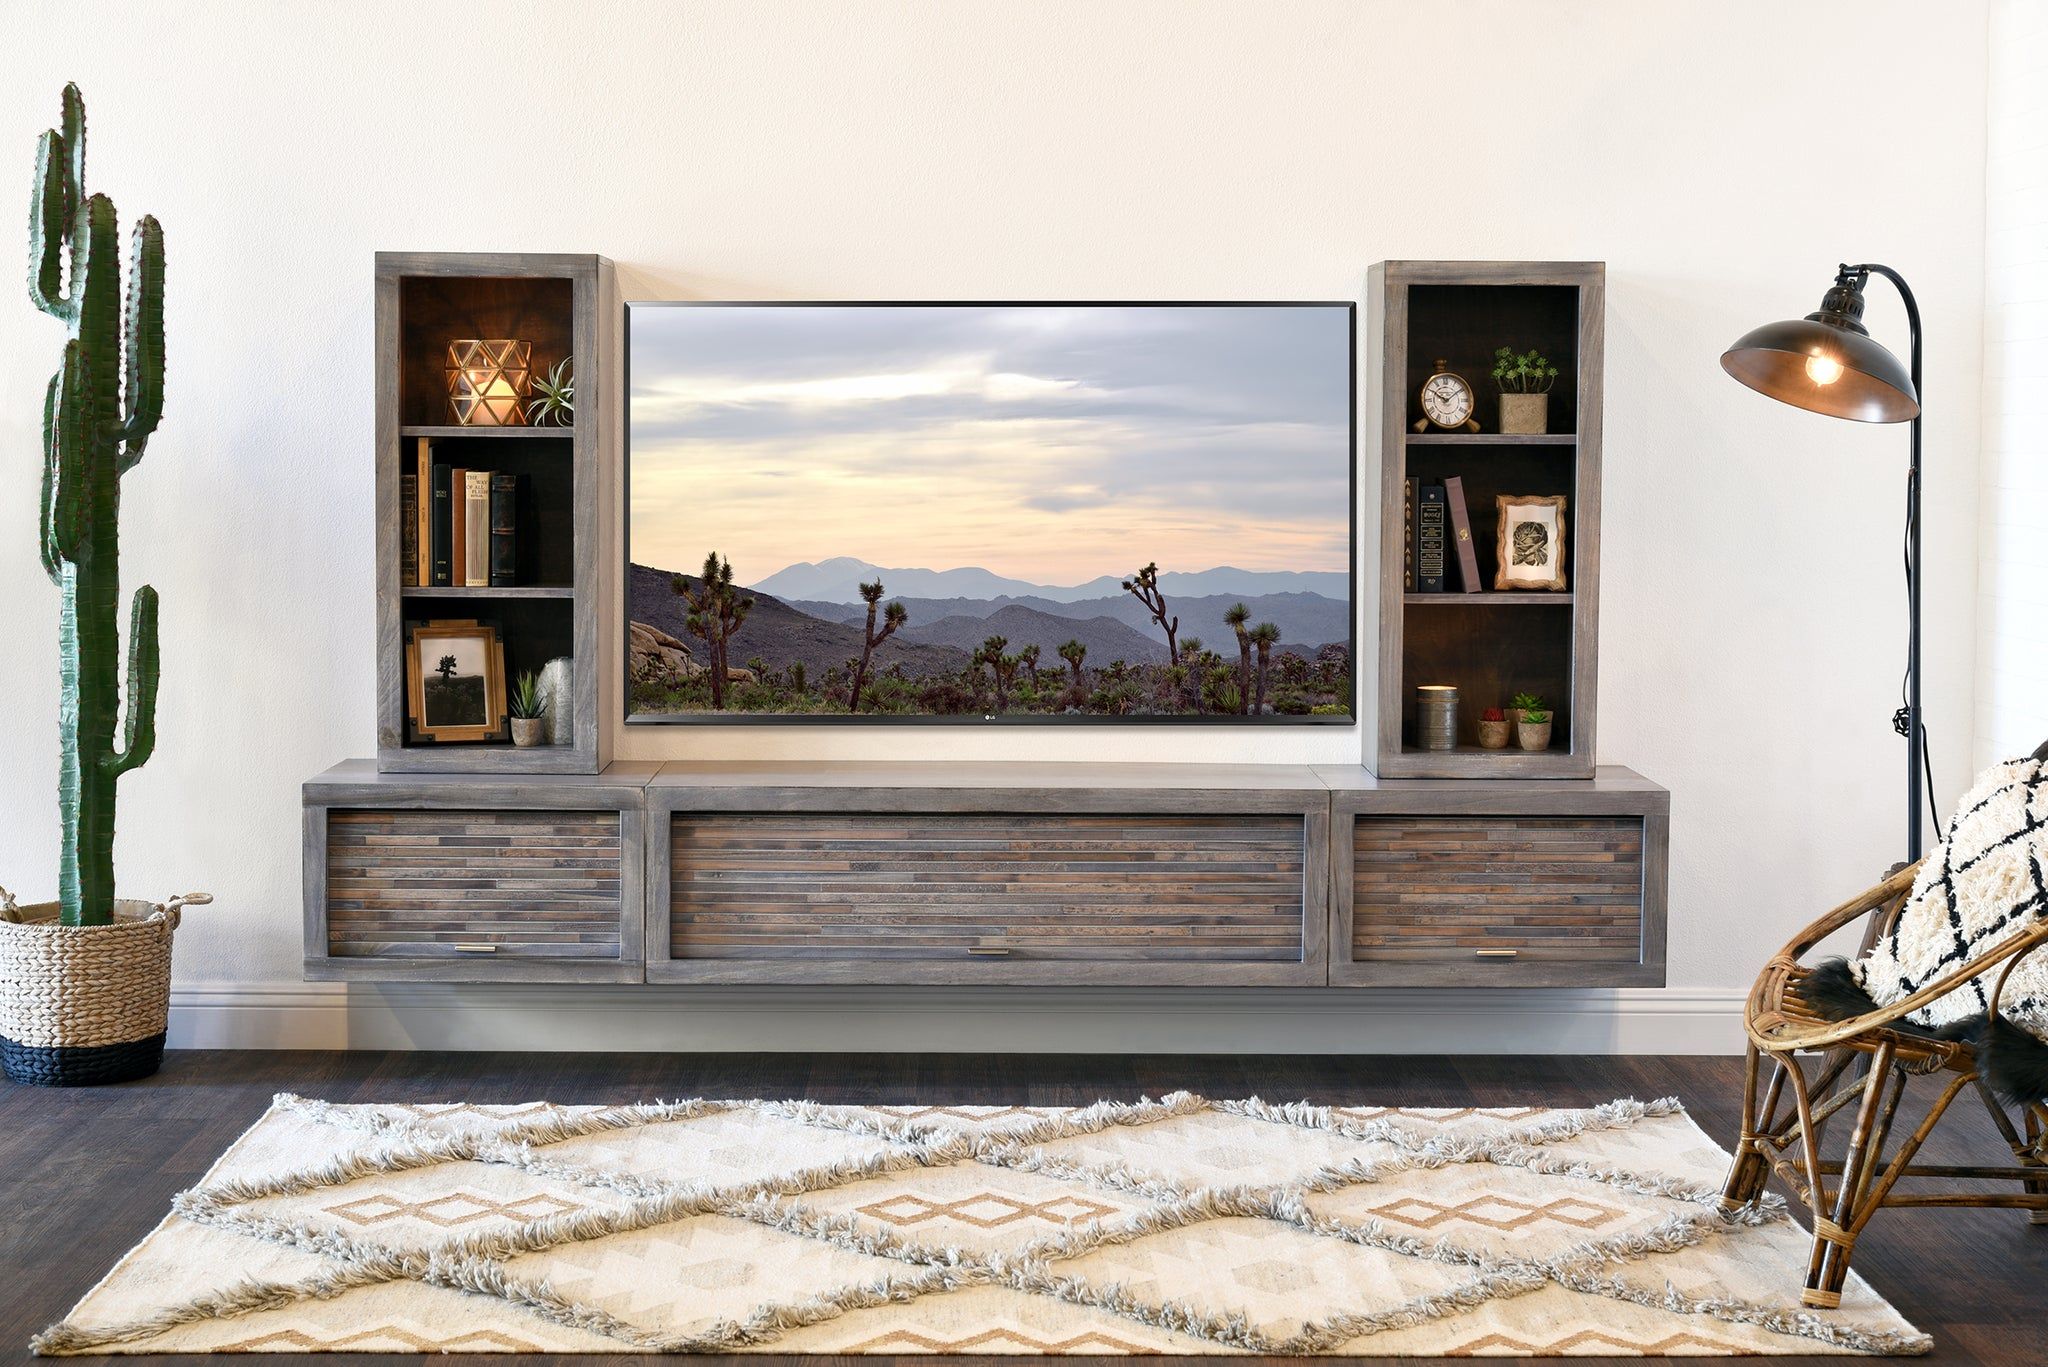 Gray Floating Tv Stand Modern Wall Mount Entertainment Center – Eco Ge Throughout Wall Mounted Floating Tv Stands (View 7 of 20)